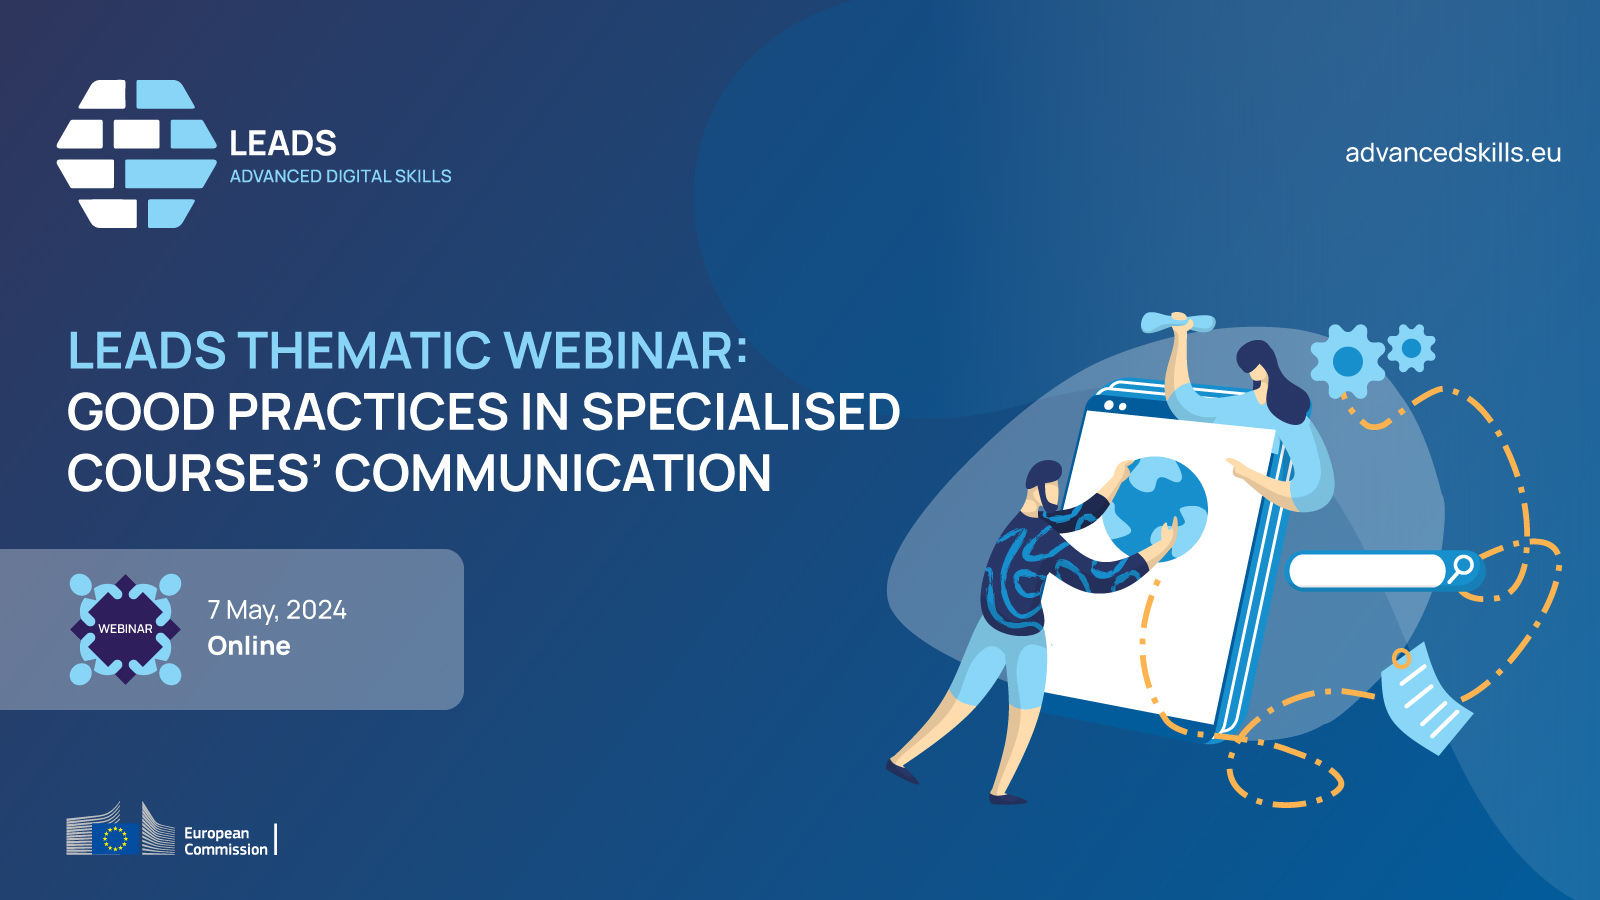 LEADS Thematic Webinar: Good Practices in SPECIALISED Courses’ Communication